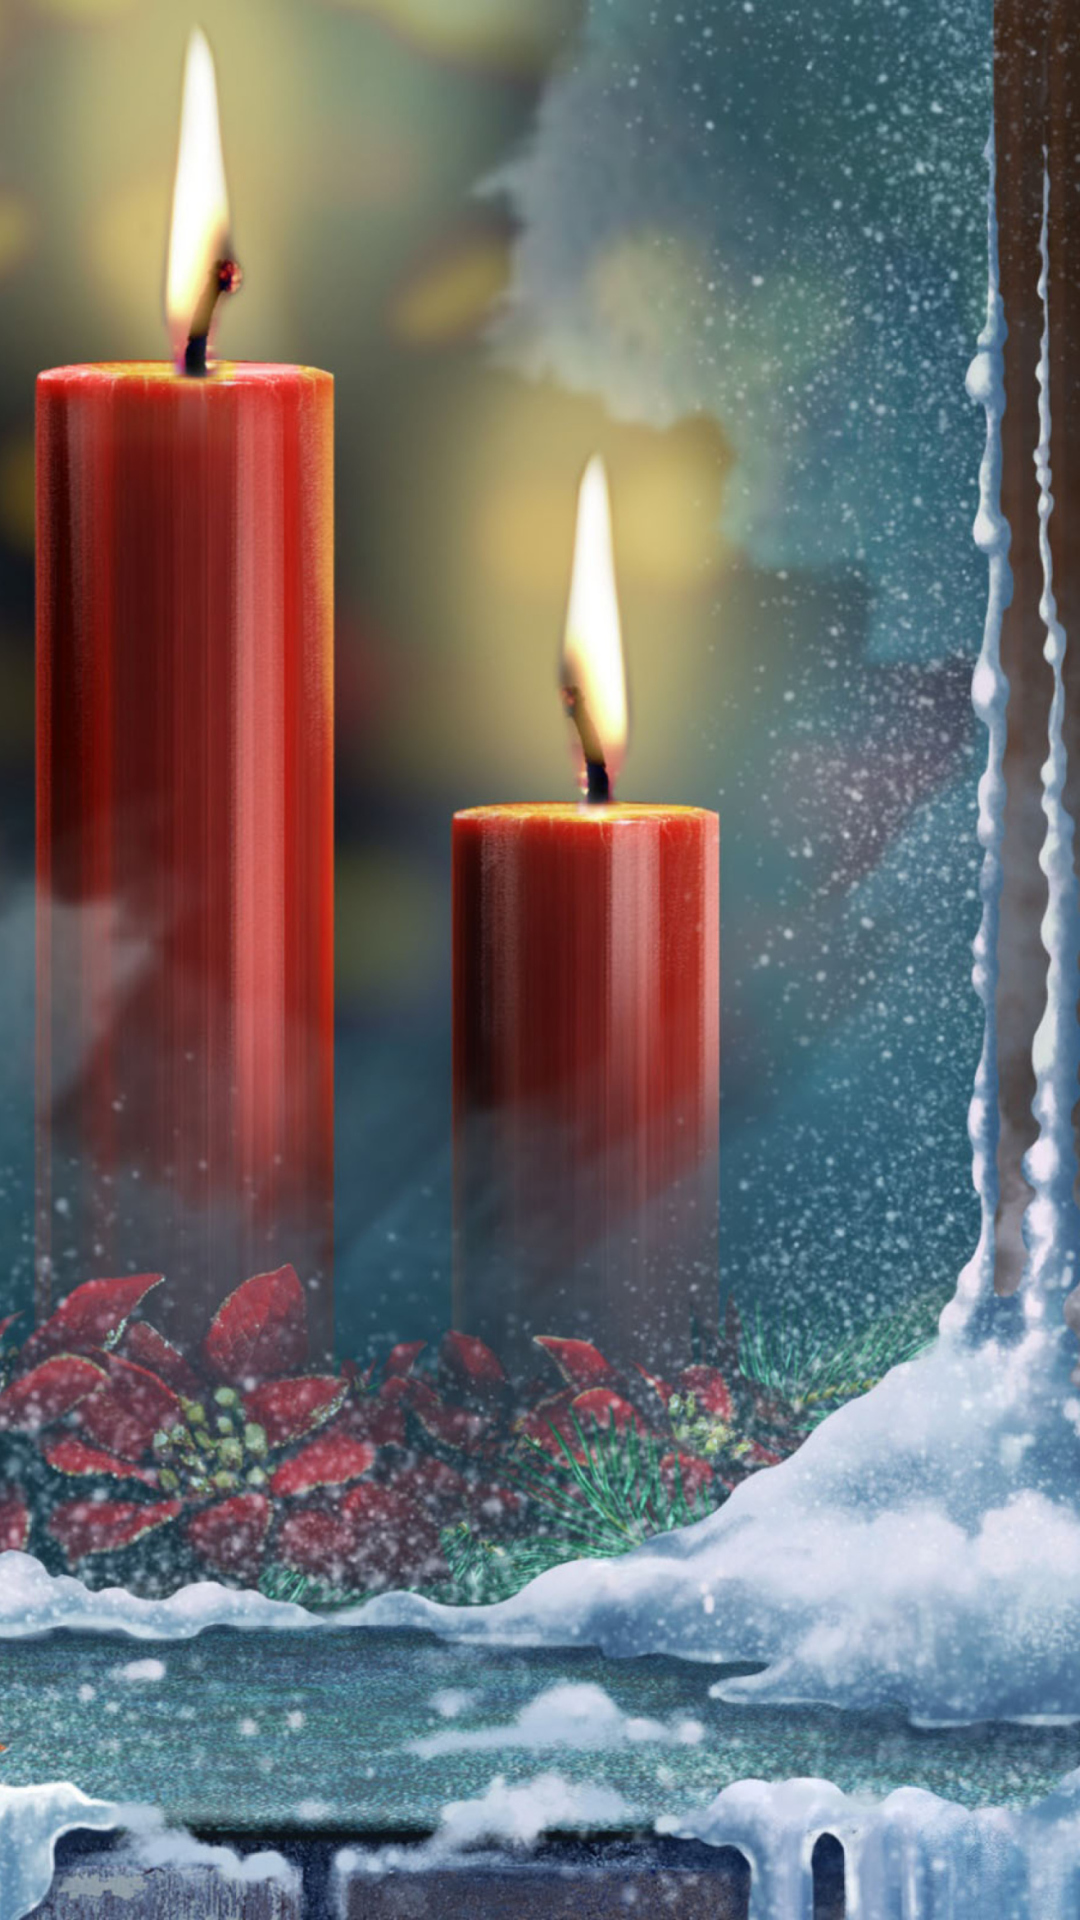 Red Candles wallpaper 1080x1920